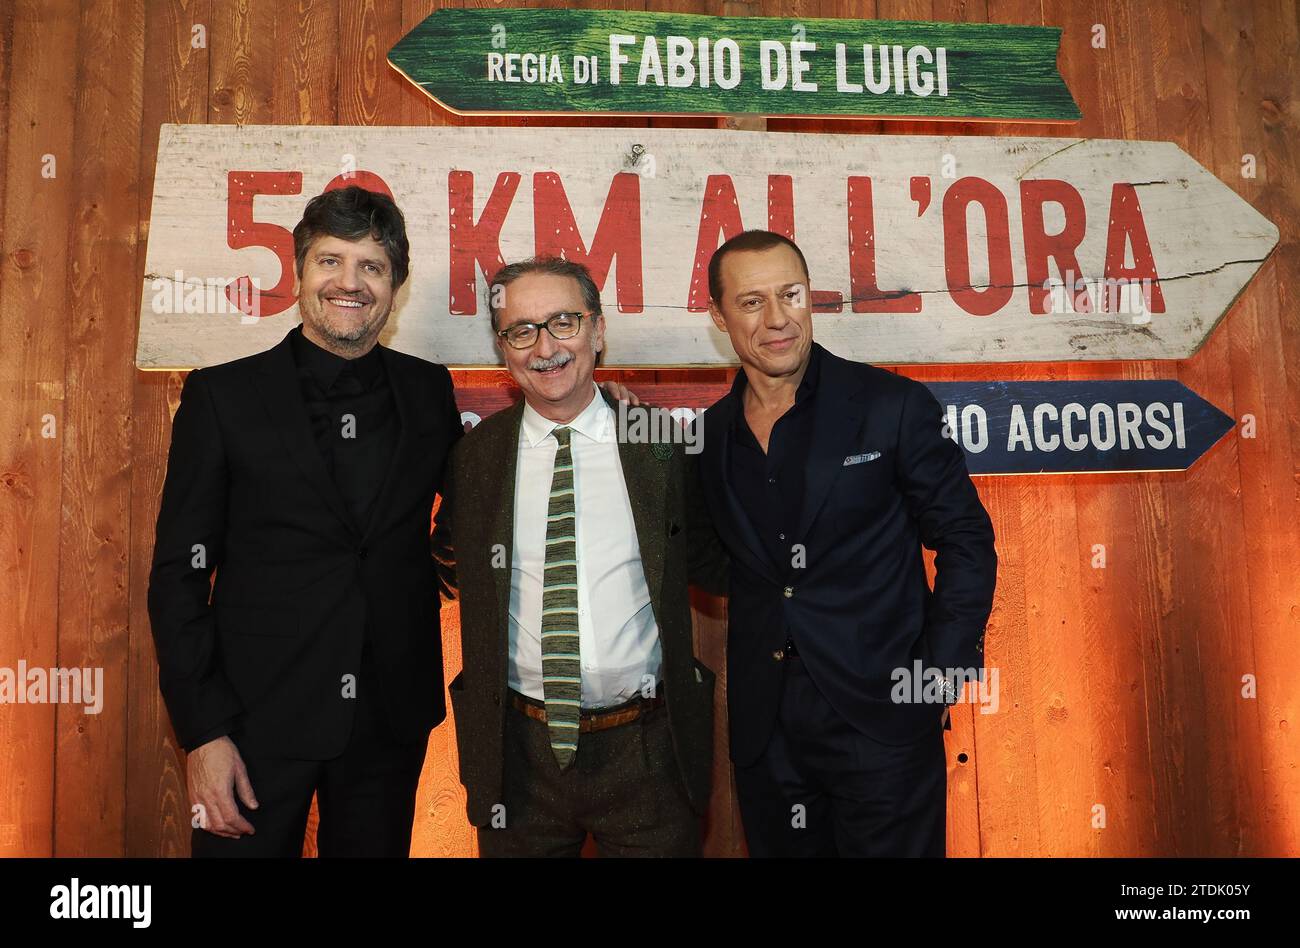 Italian actors Fabio De Luigi and Stefano Accorsi (with Gianluca Farinelli director of cineteca) attempting at the premiere of their new movie “50 km Stock Photo